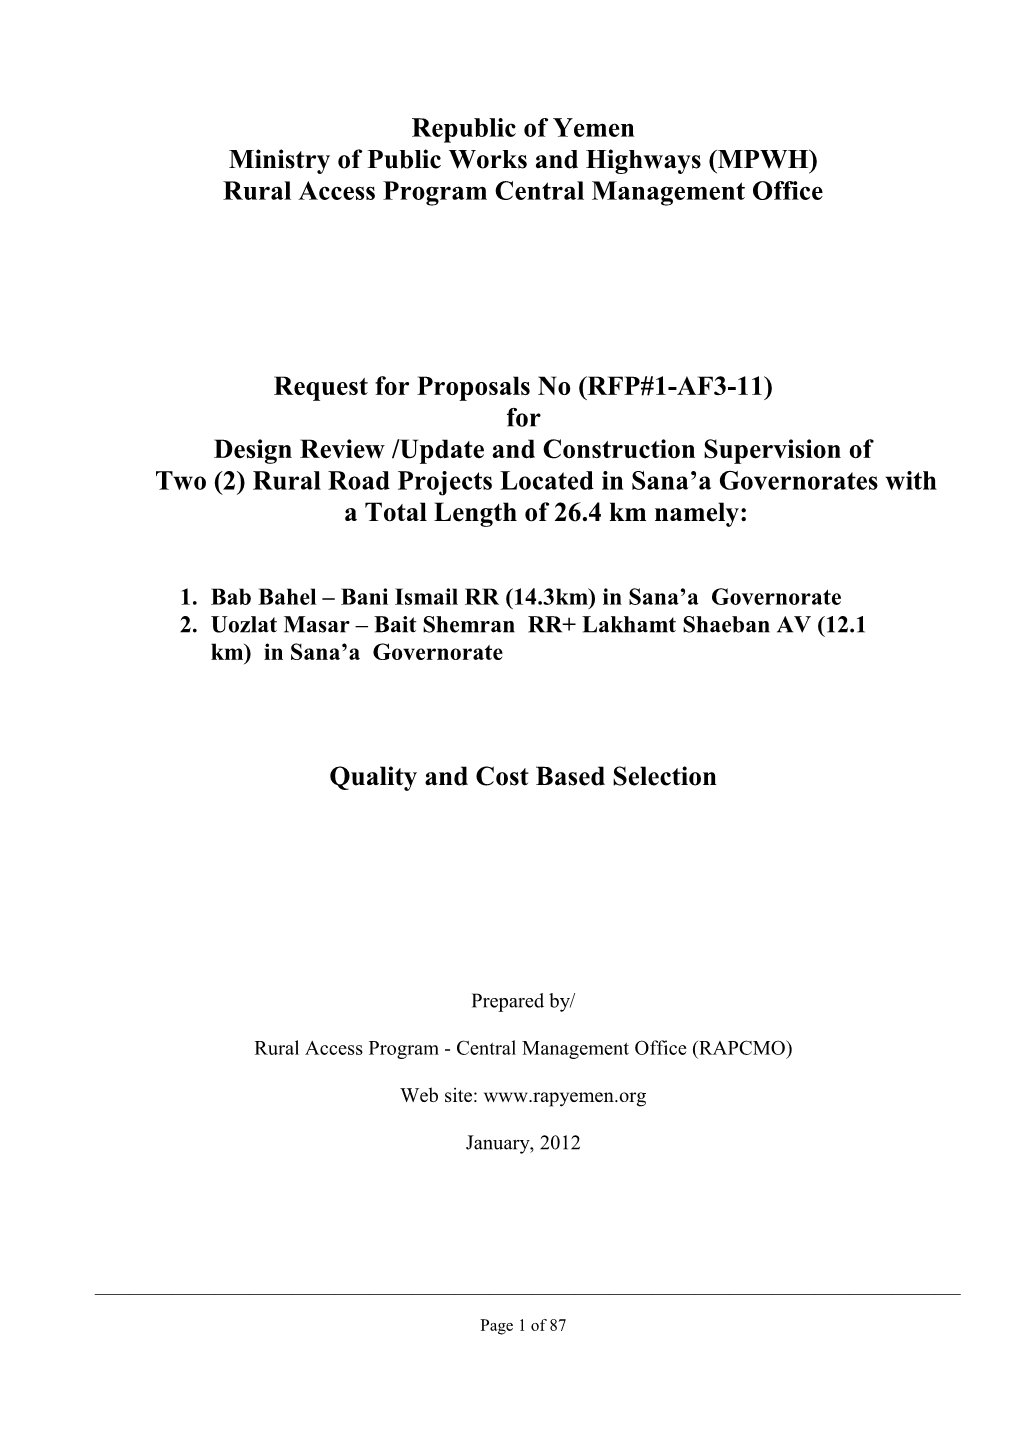 RFP#1-AF3-11 for Design Reviewand Construction Supervision of Two (2) Rural Road Project S